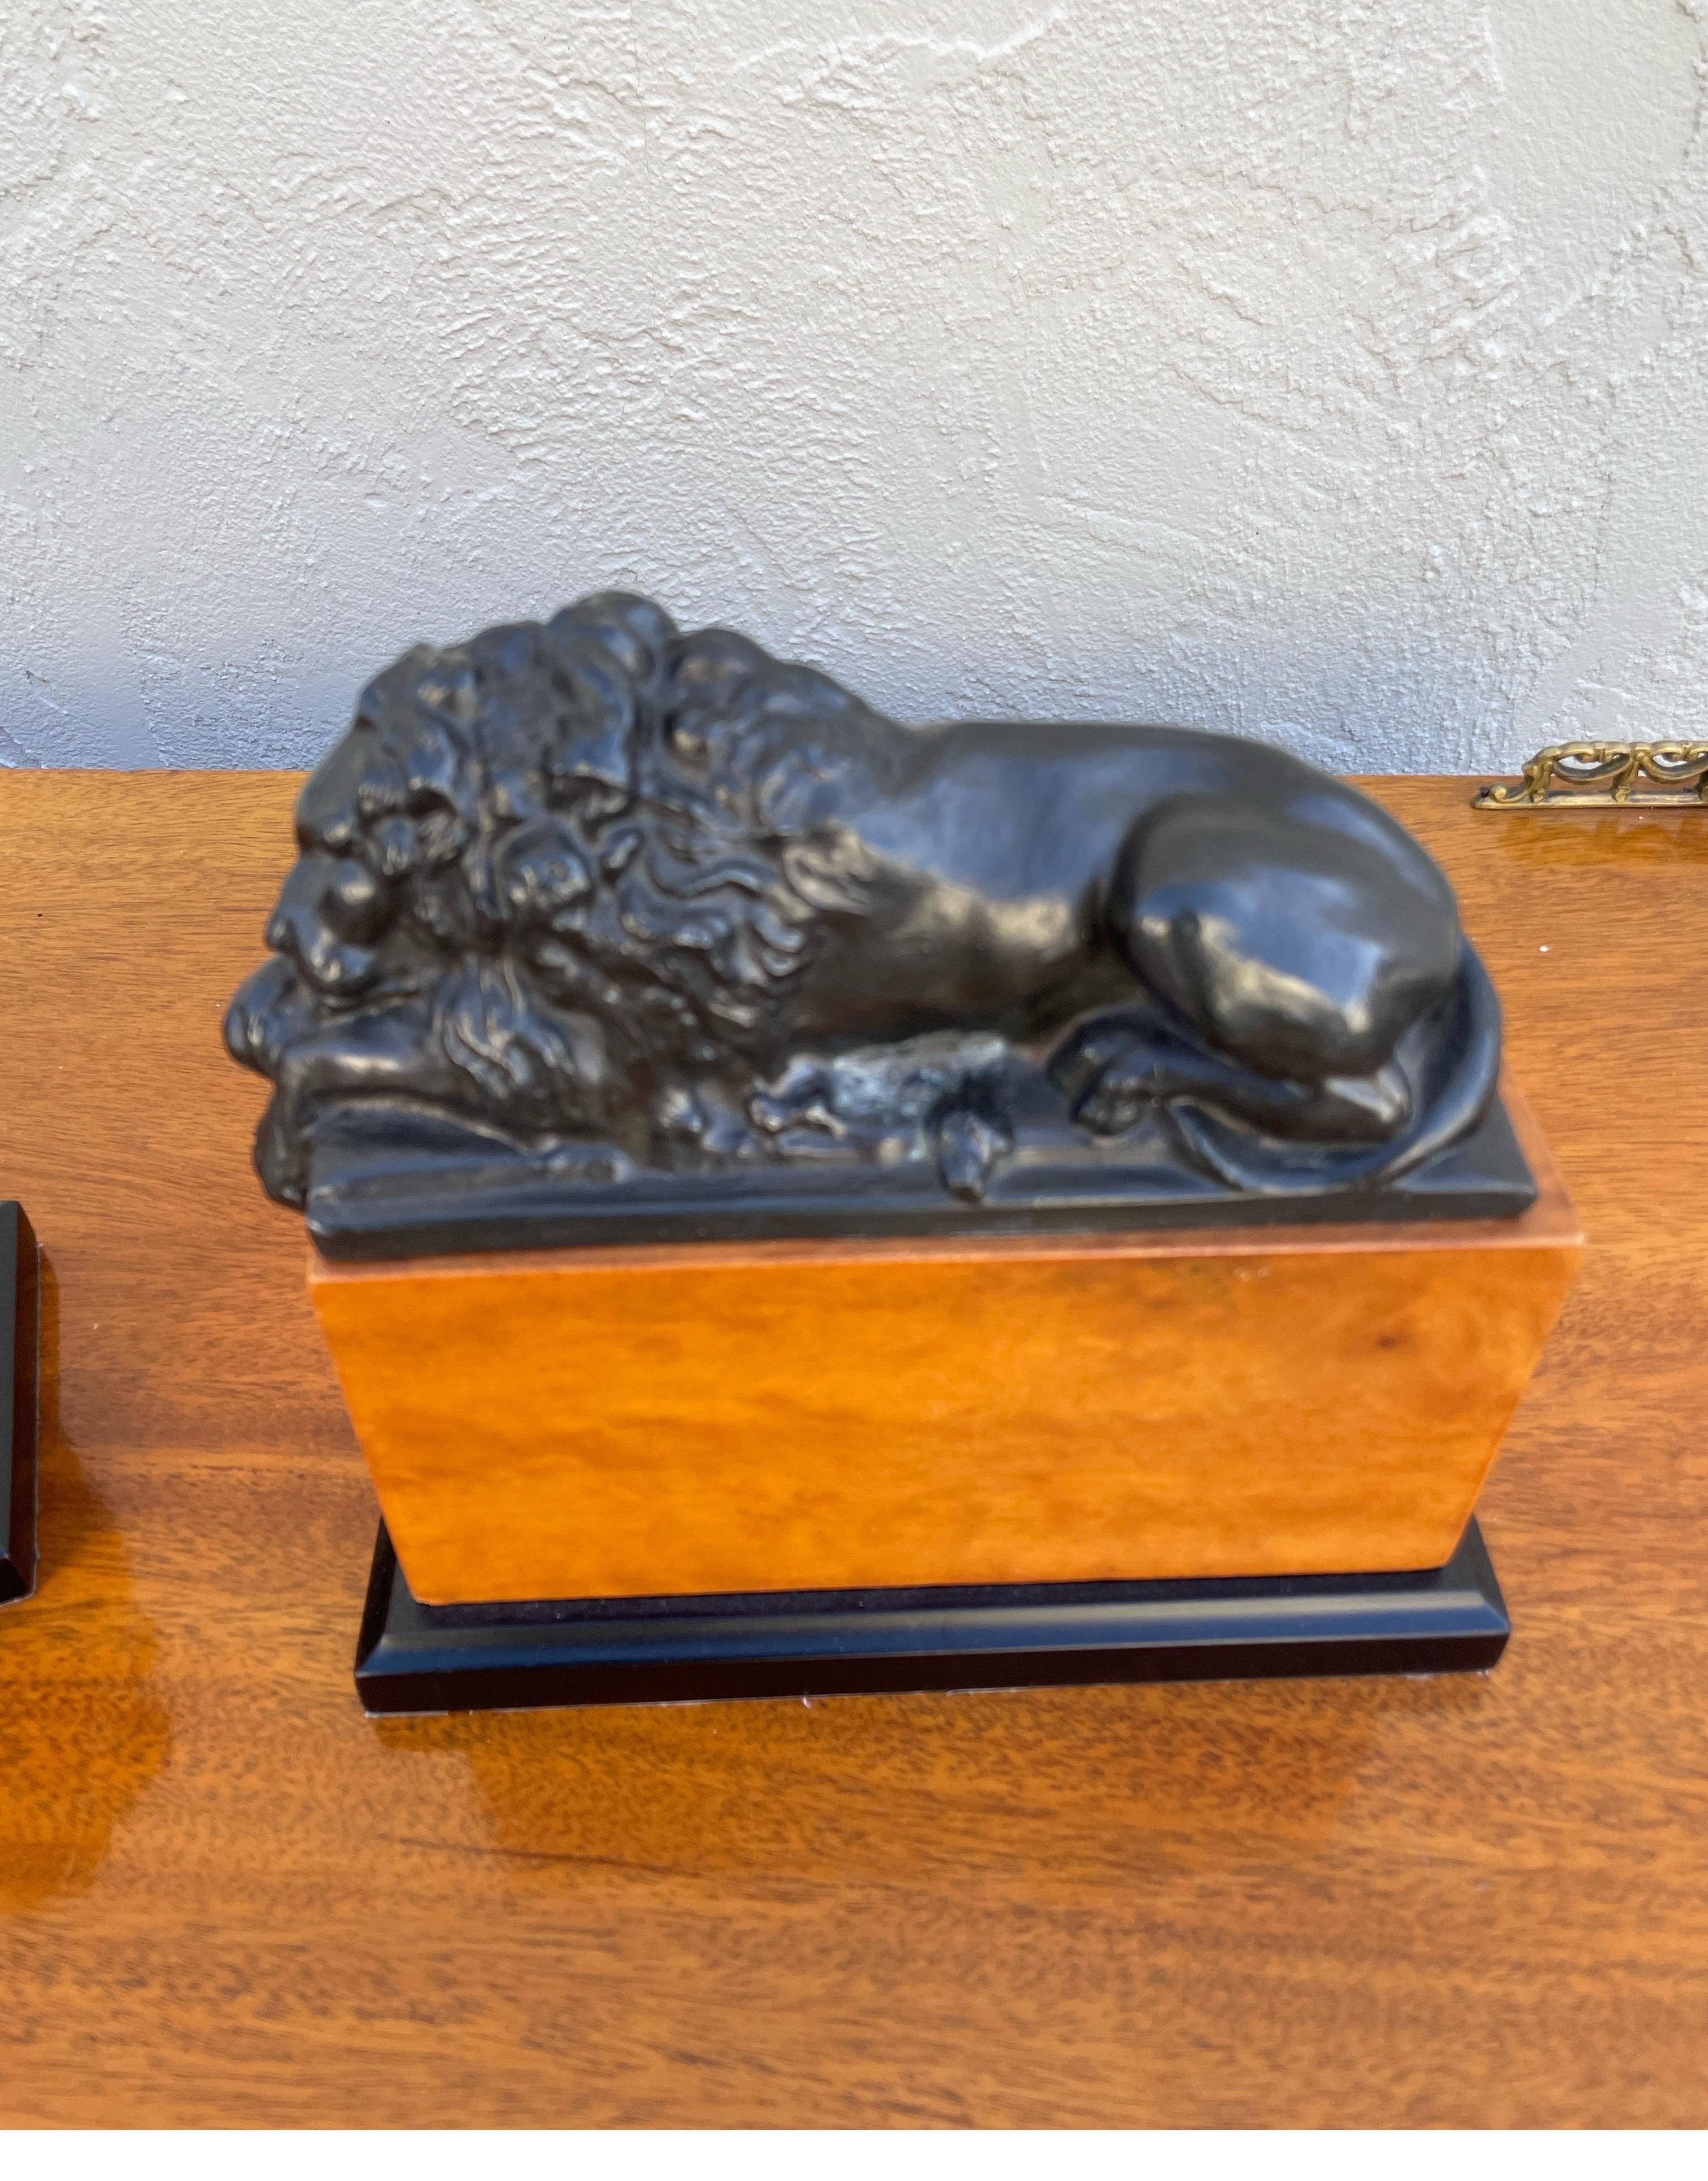 Vintage pair of opposing lion bookends in the Neoclassical style.